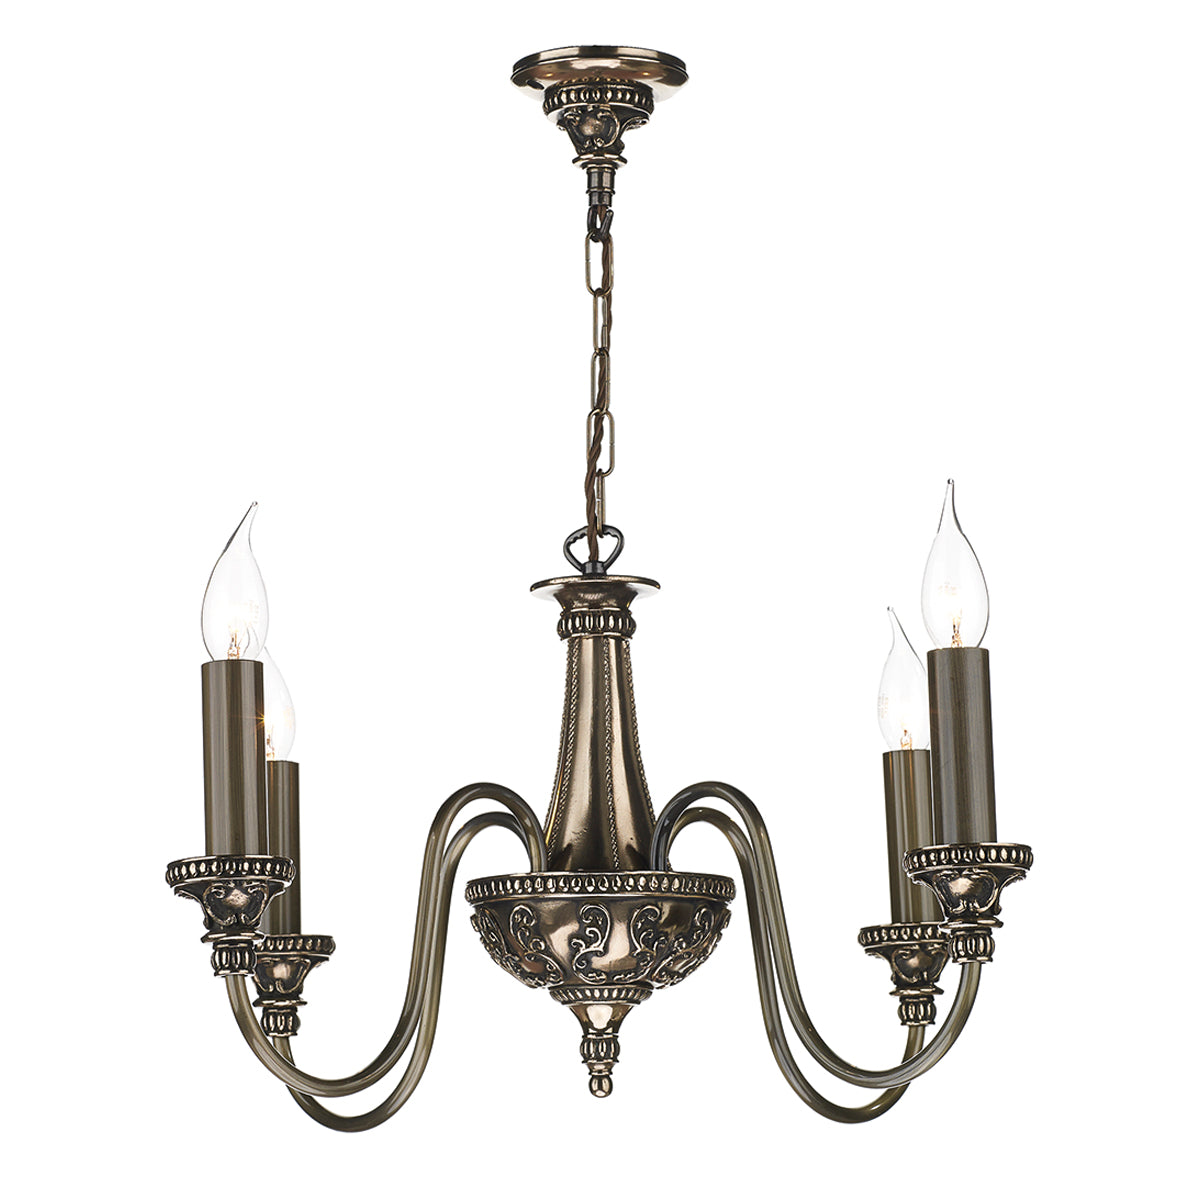 This 4 light chandelier is shown in dark bronze metal the ceiliing rose has a very detailed floral pattern which has a chain from it coming down to a large central decorative centre plinth, the base of which is curved with lots of floral decoration, there are 4 curved arms coming off the central stem to the lamp holders which the base of the bulb holders are also floral decorated. There are long elongated candle drips covering the inner bulb holder.